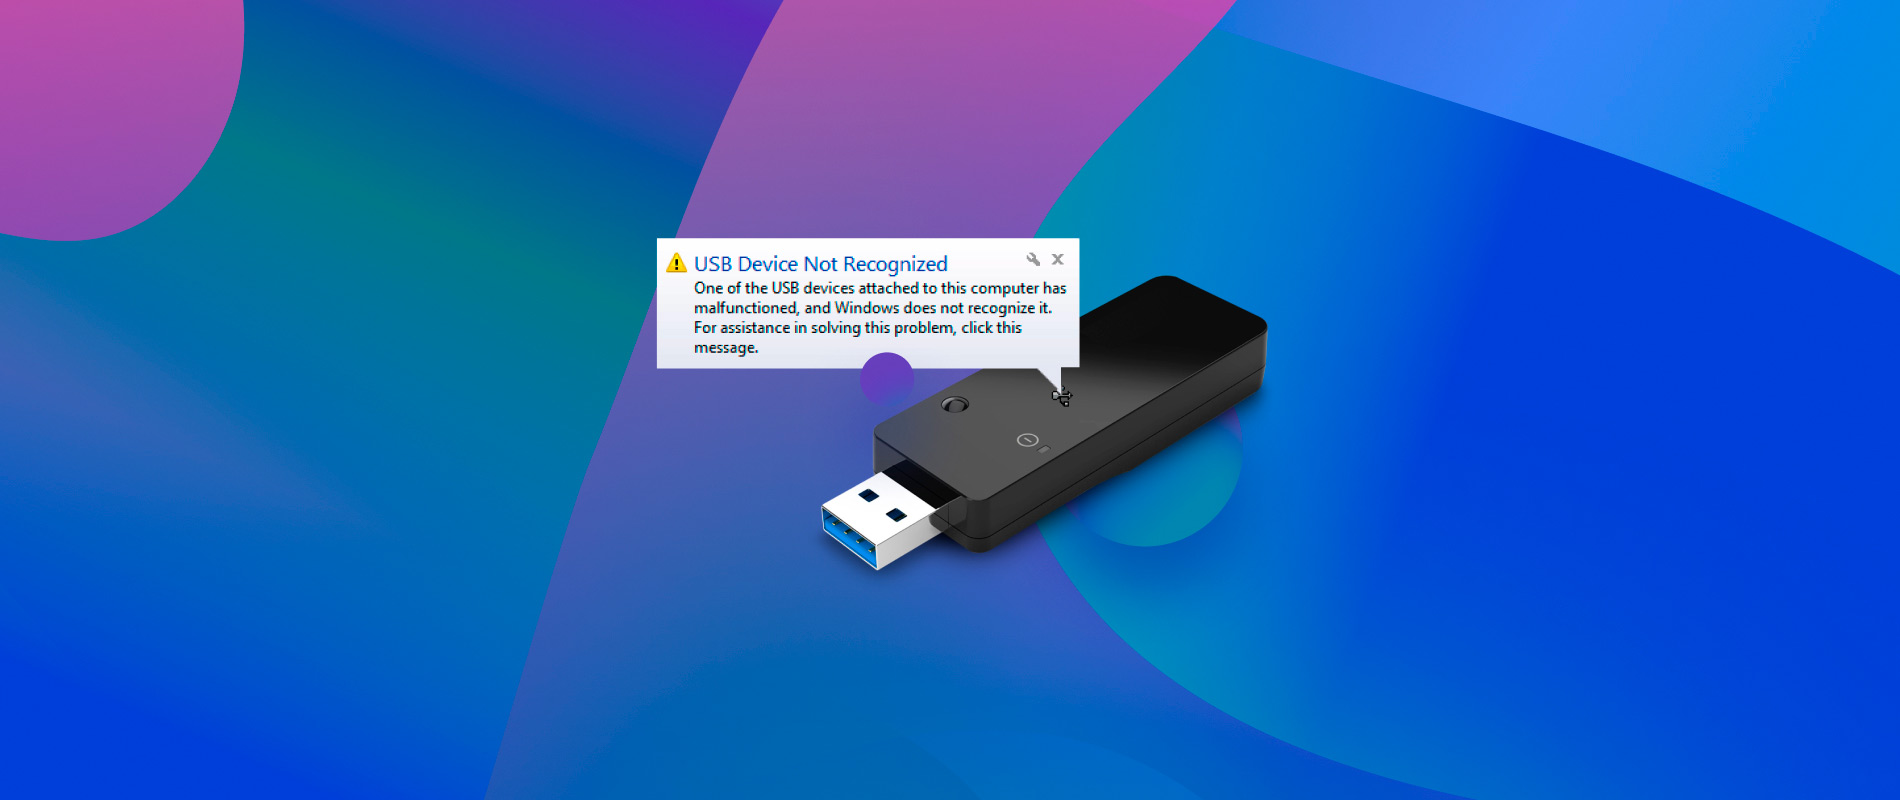 Windows will automatically reinstall the USB drivers.
Check if the USB device is recognized.